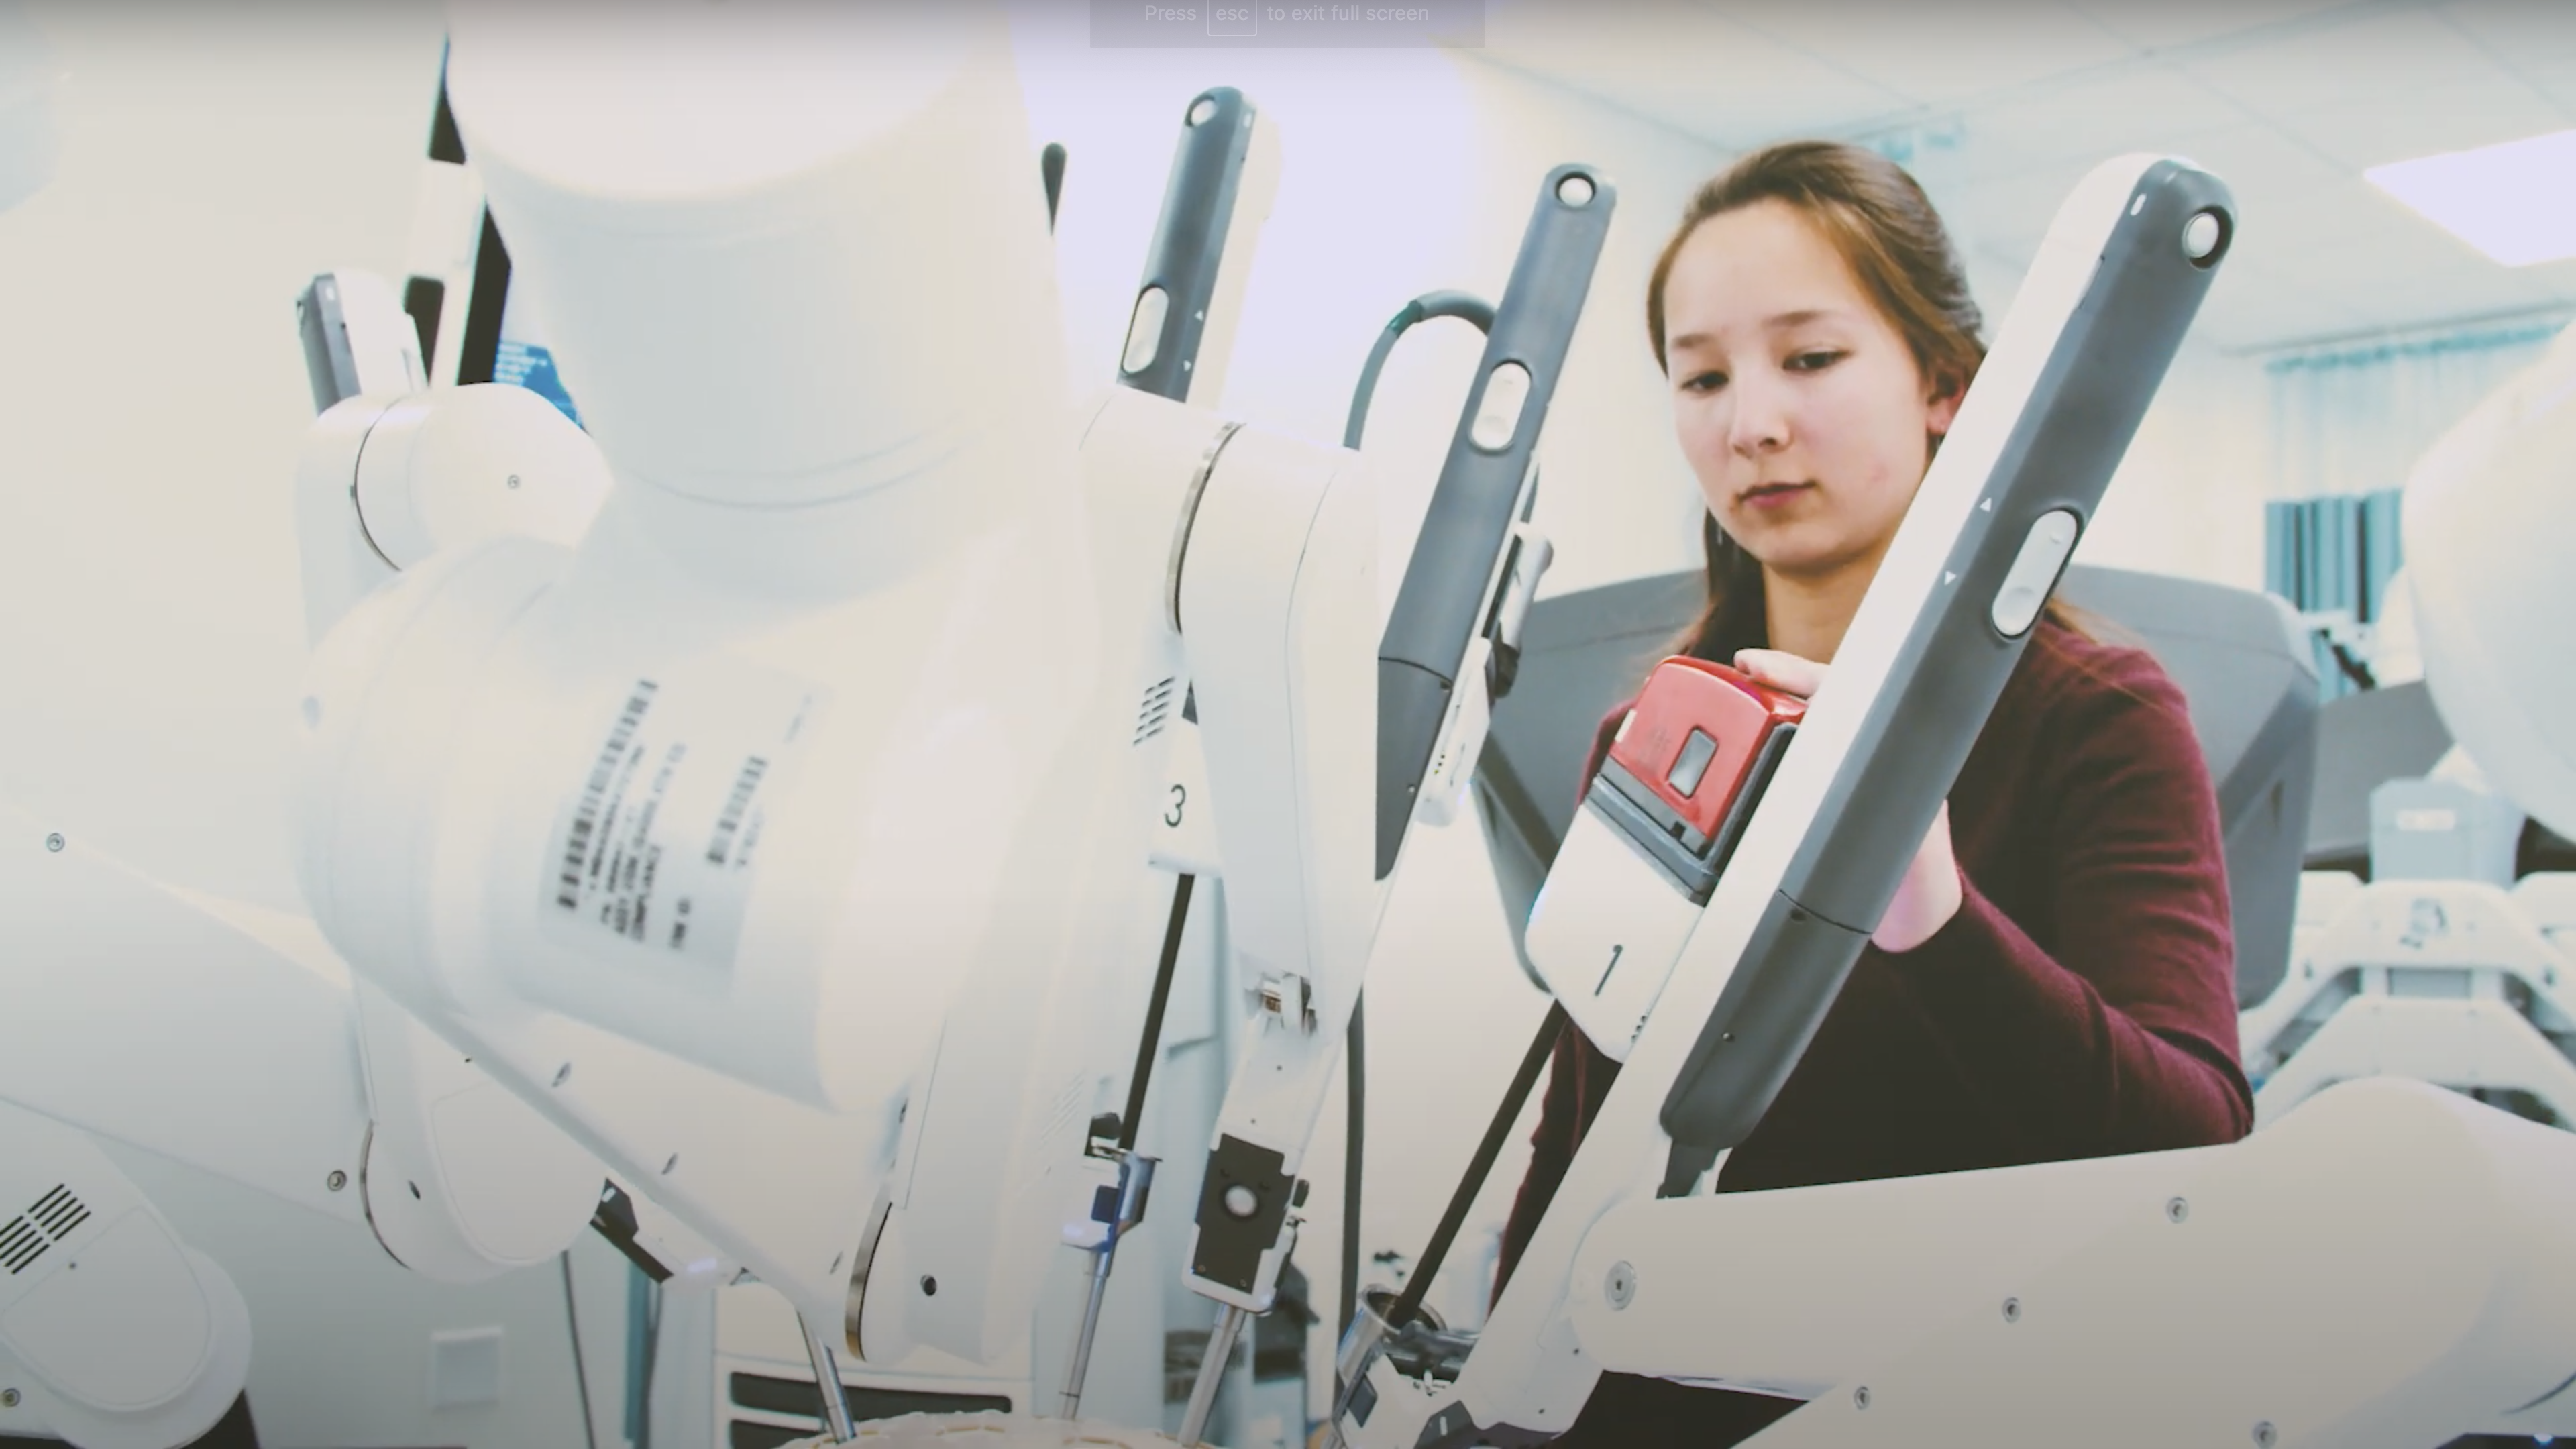 Intuitive Surgical advances tech while training students.